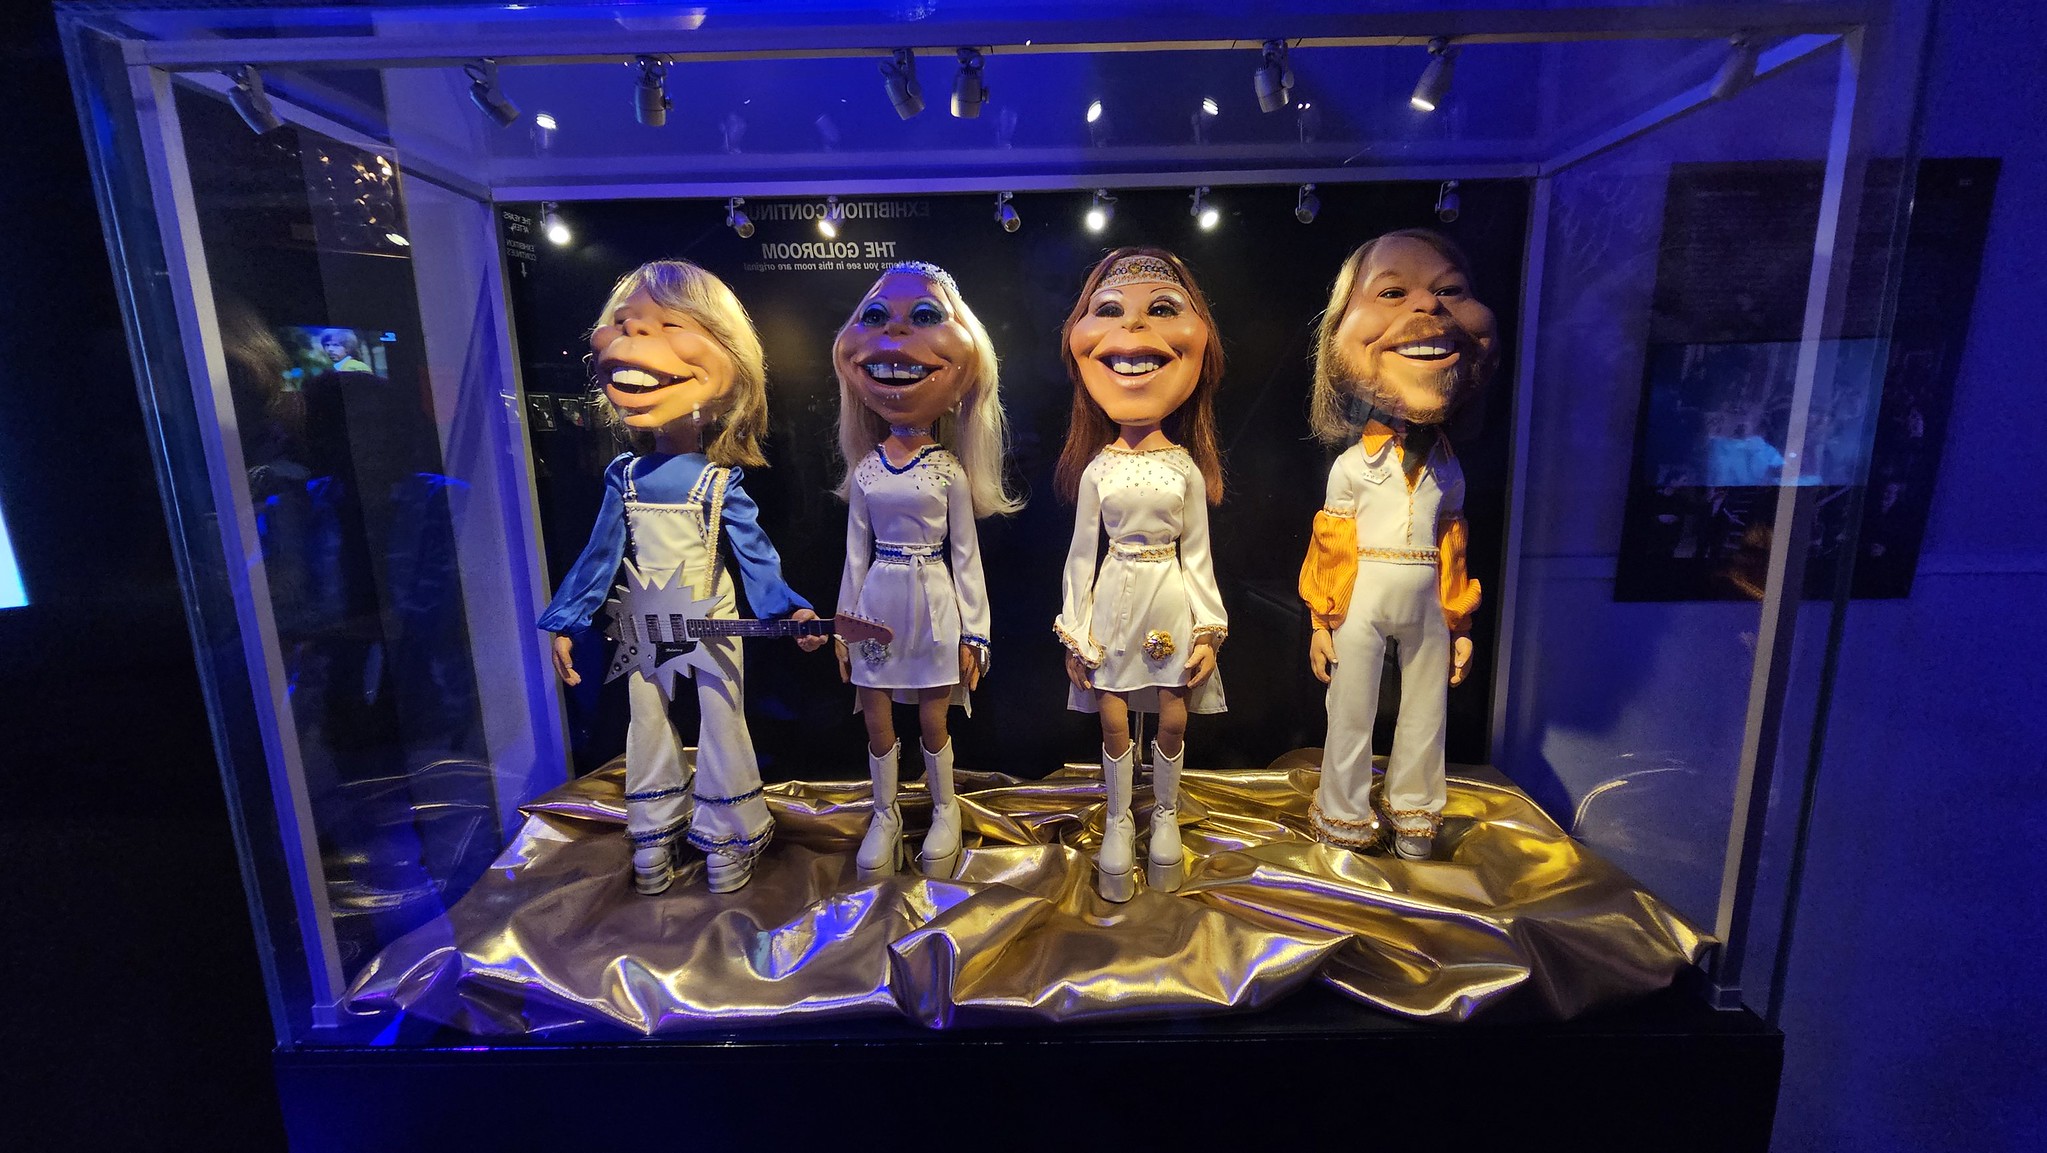 A Spitting Image version of Abba